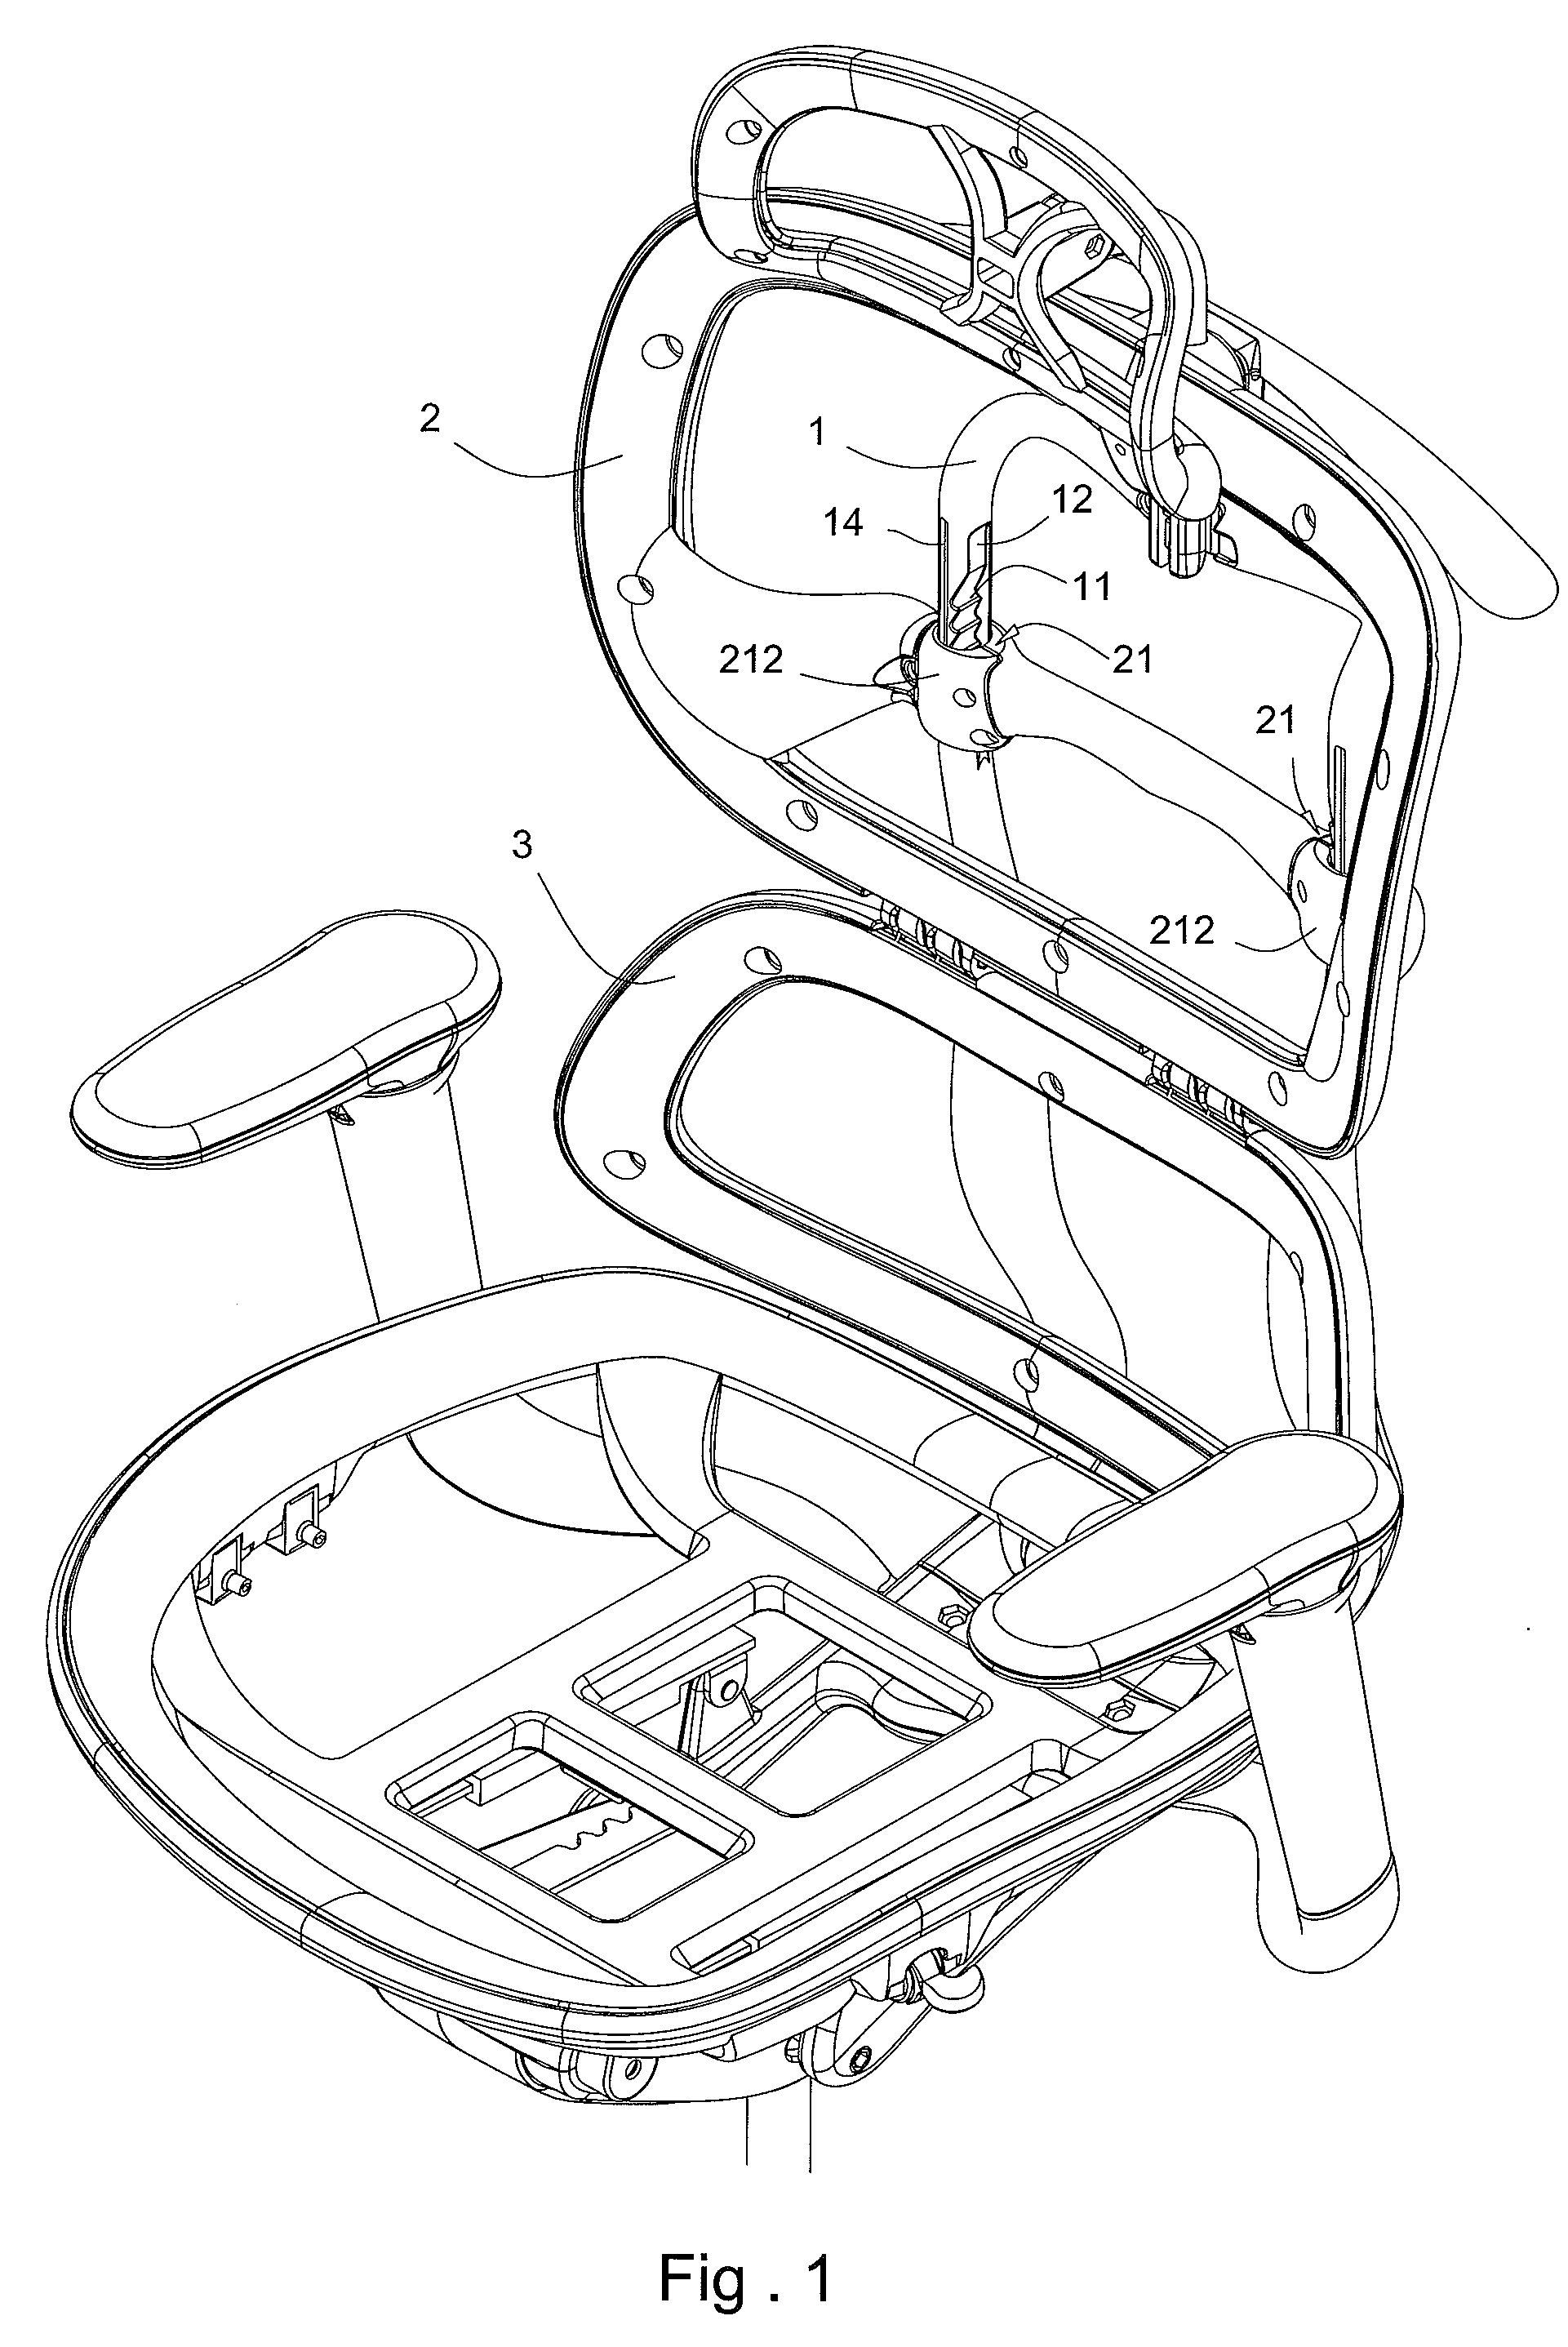 Height-Adjusting Assembly for Office Chair Backrest